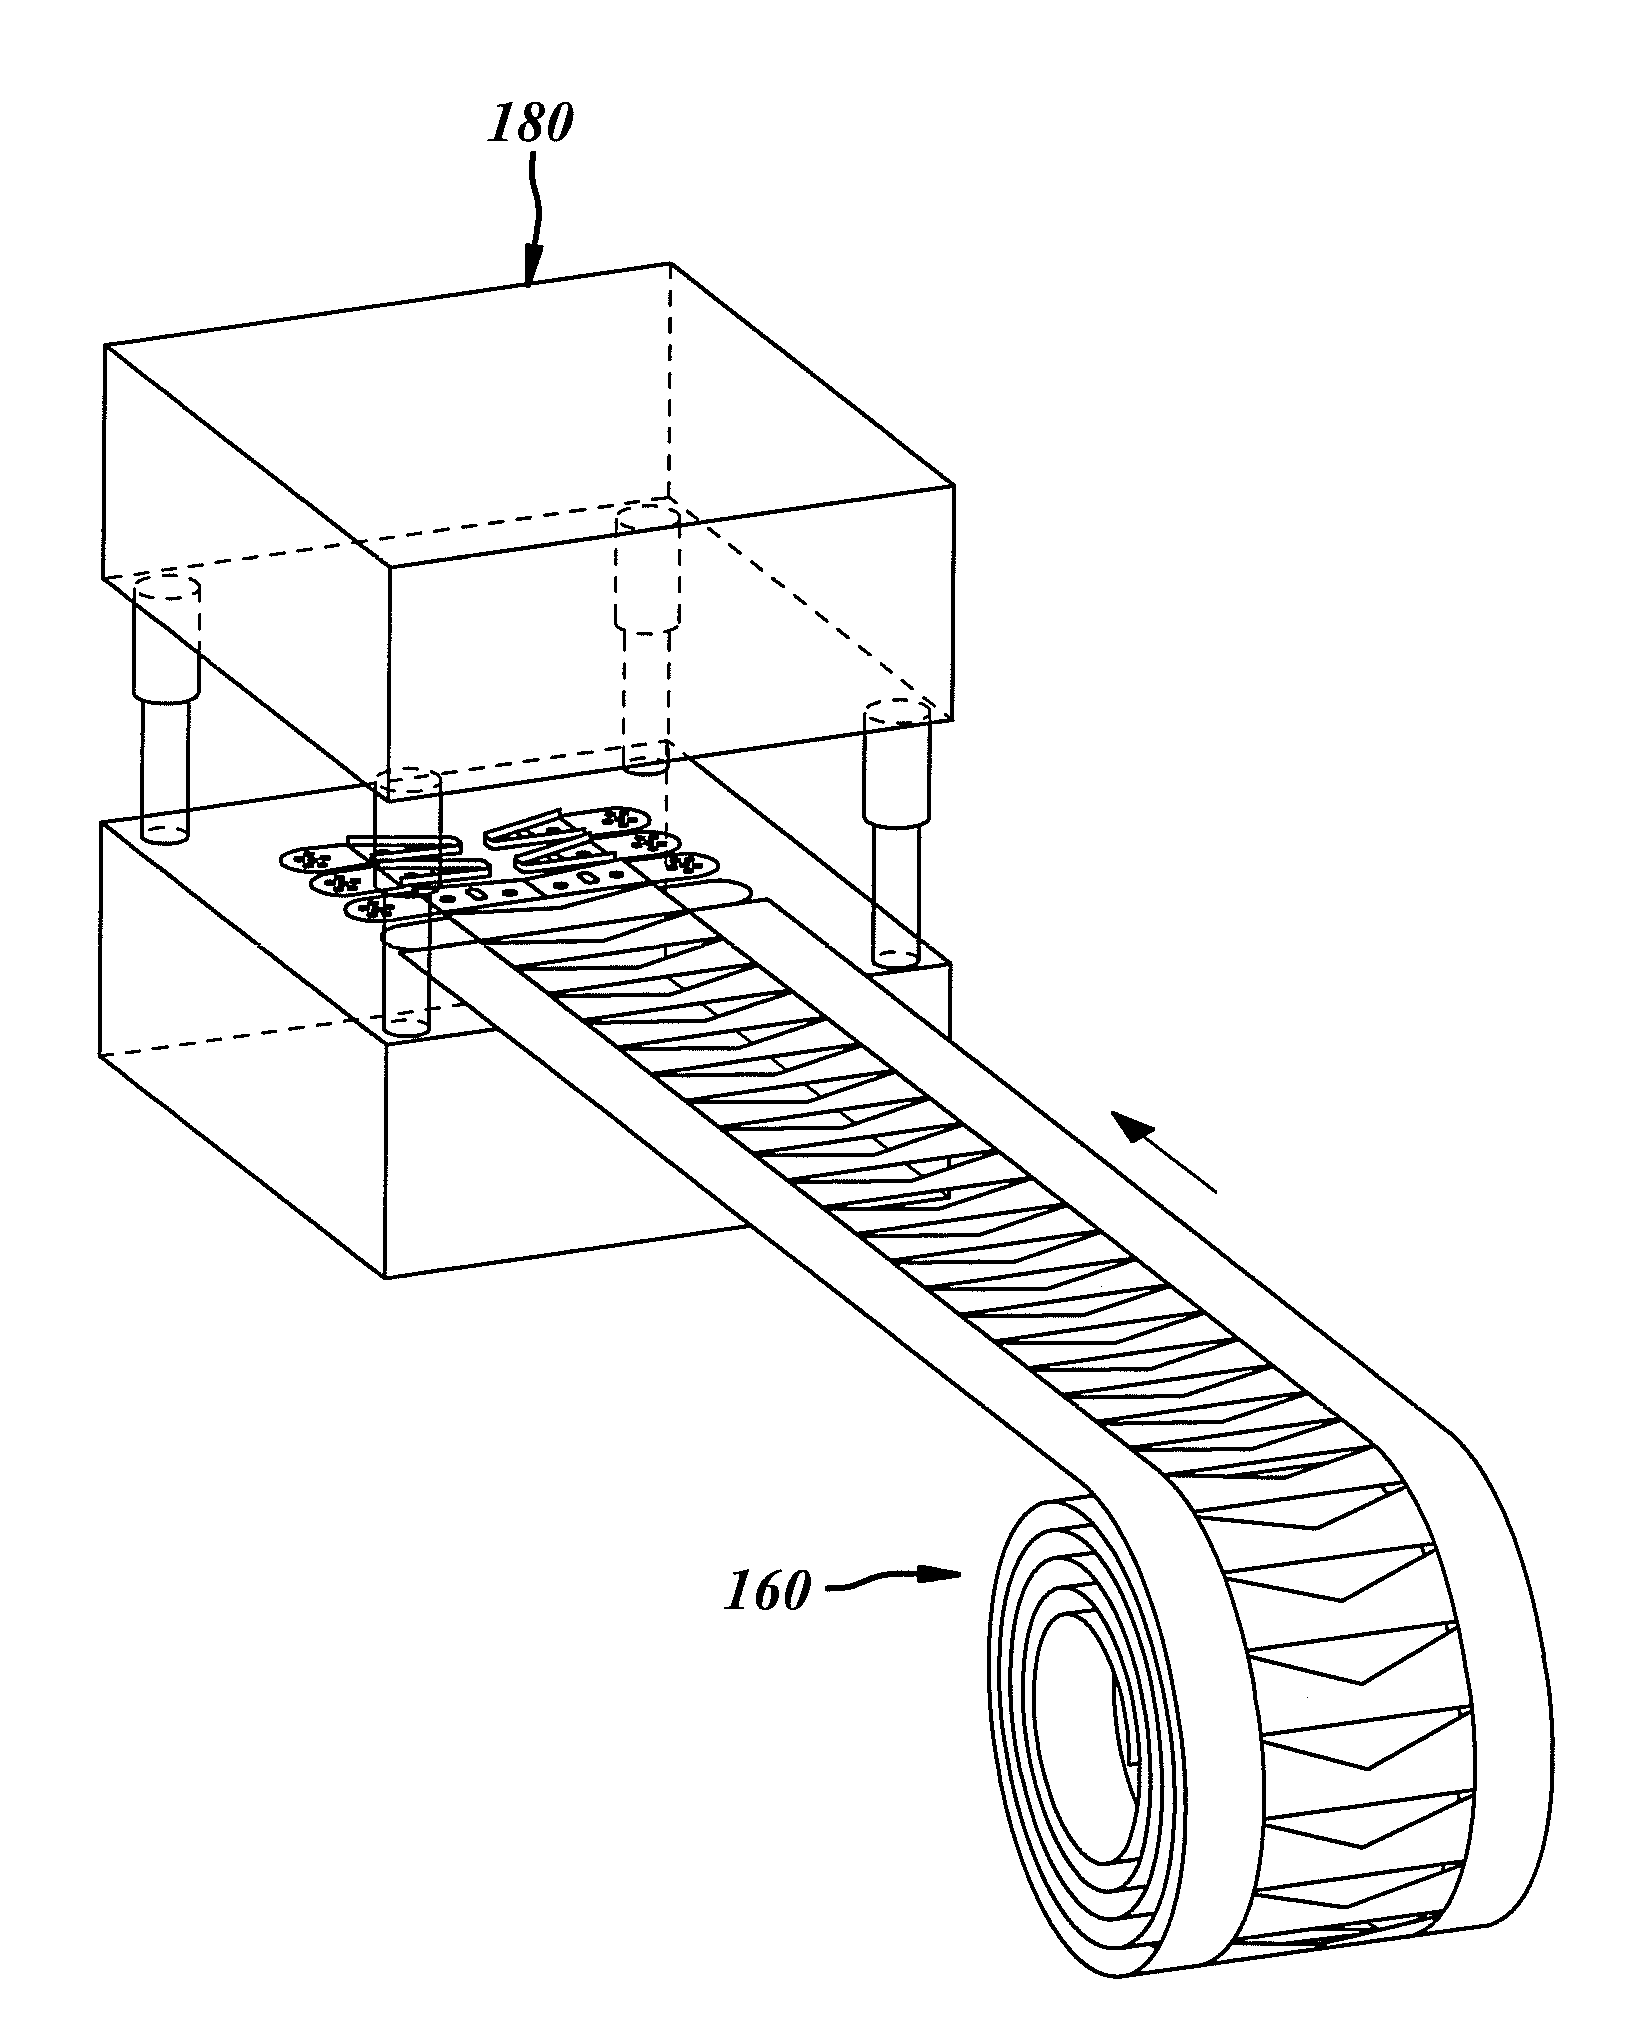 Metal forming process and welded coil assembly